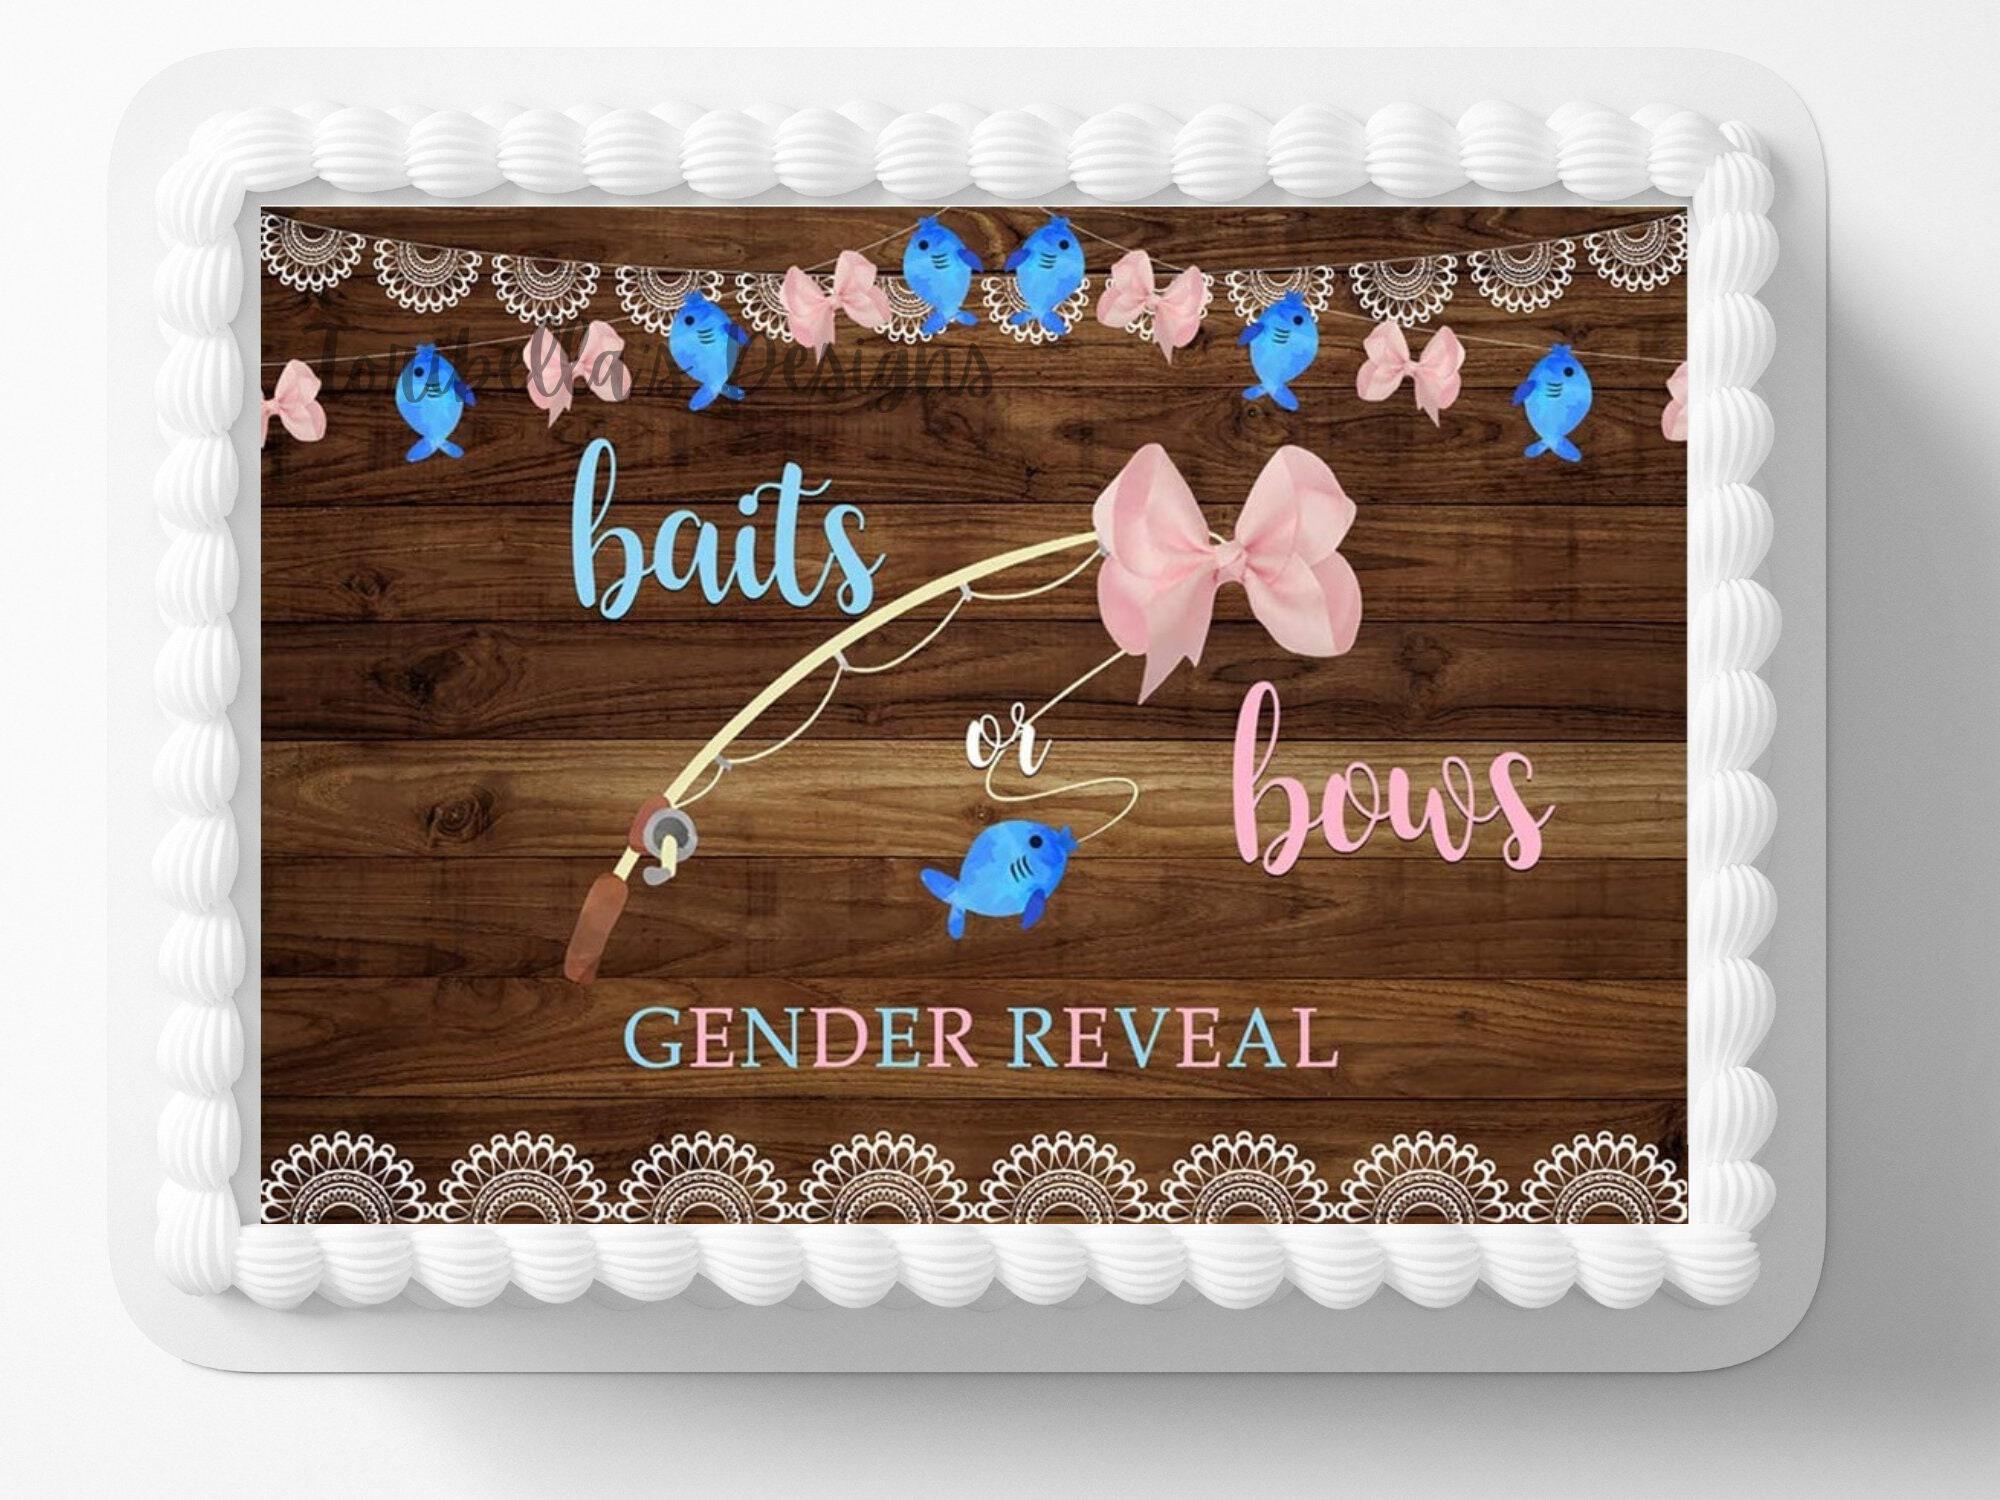 Wedding & Celebrations :: Party Supplies :: Cake Toppers :: Gender Reveal  Baits Or Bows Edible Image Fishing Theme Party Cake Topper Frosting Sheet  Icing Frosting Edible Sticker Easy To Apply Decal